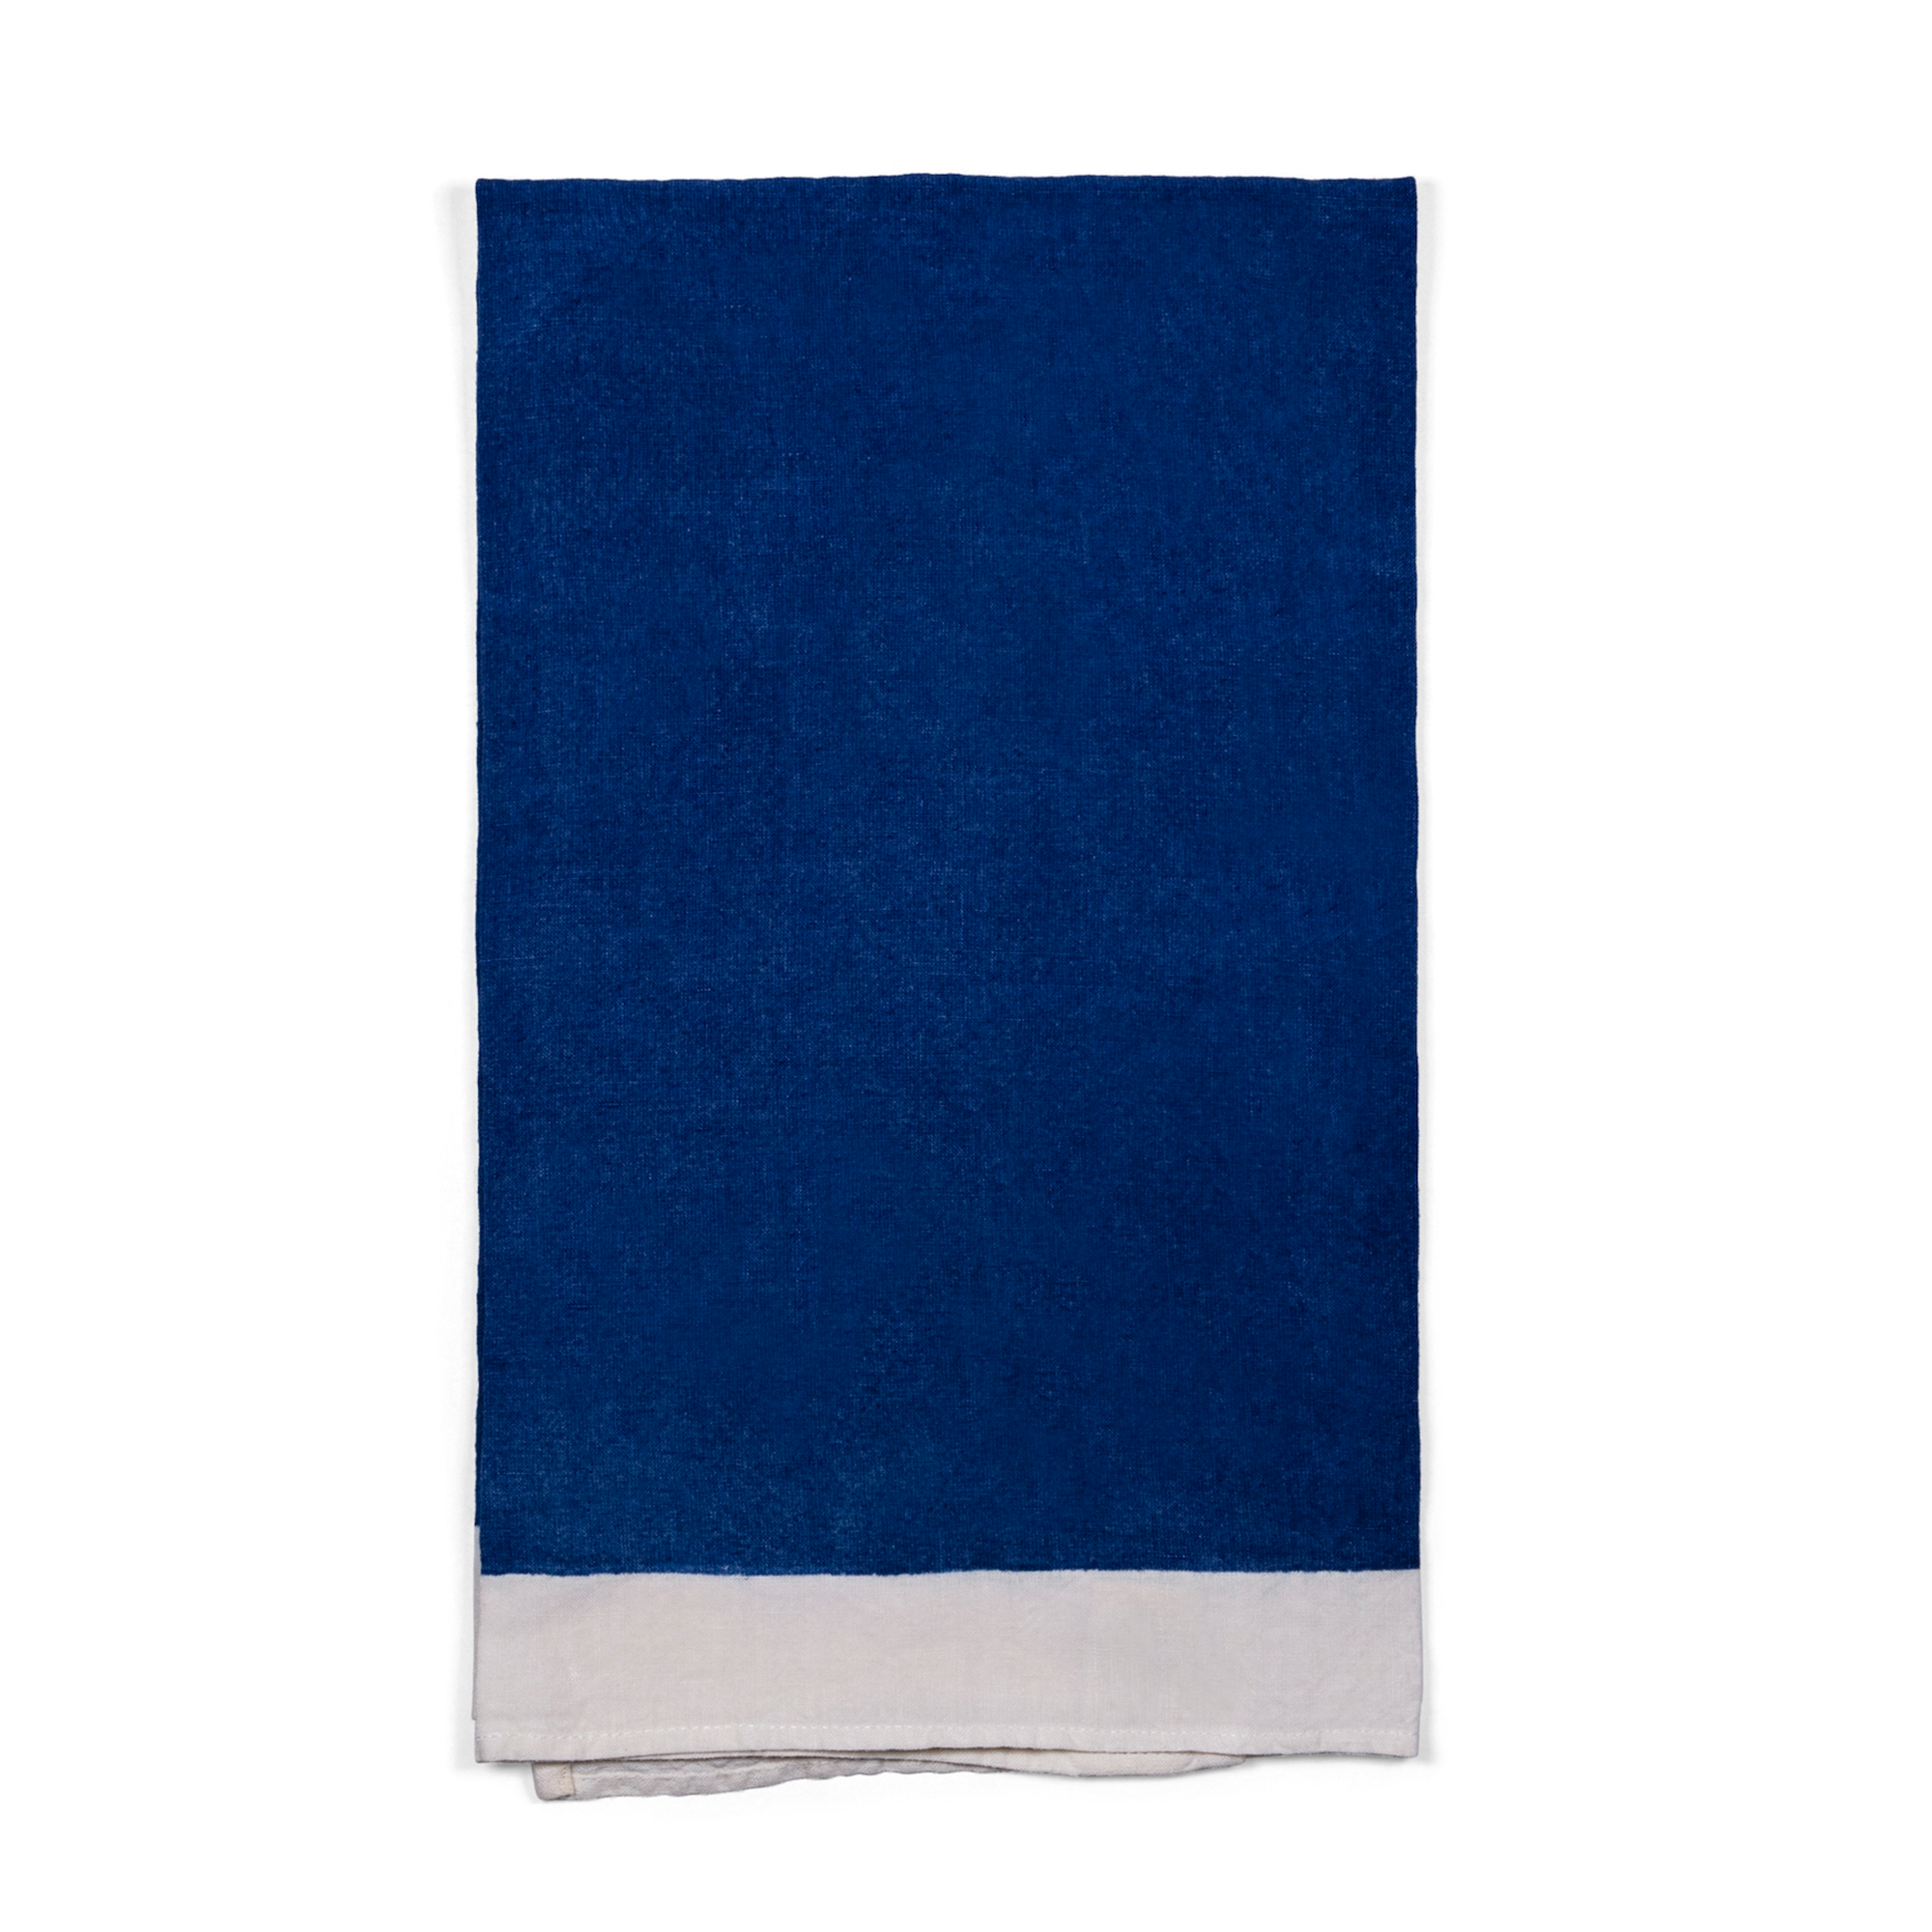 A stylish dark blue linen tea towel with white borders, handmade using pear wood.  Can be used in kitchen, for breakfast, formal dining, or garden tablescape.